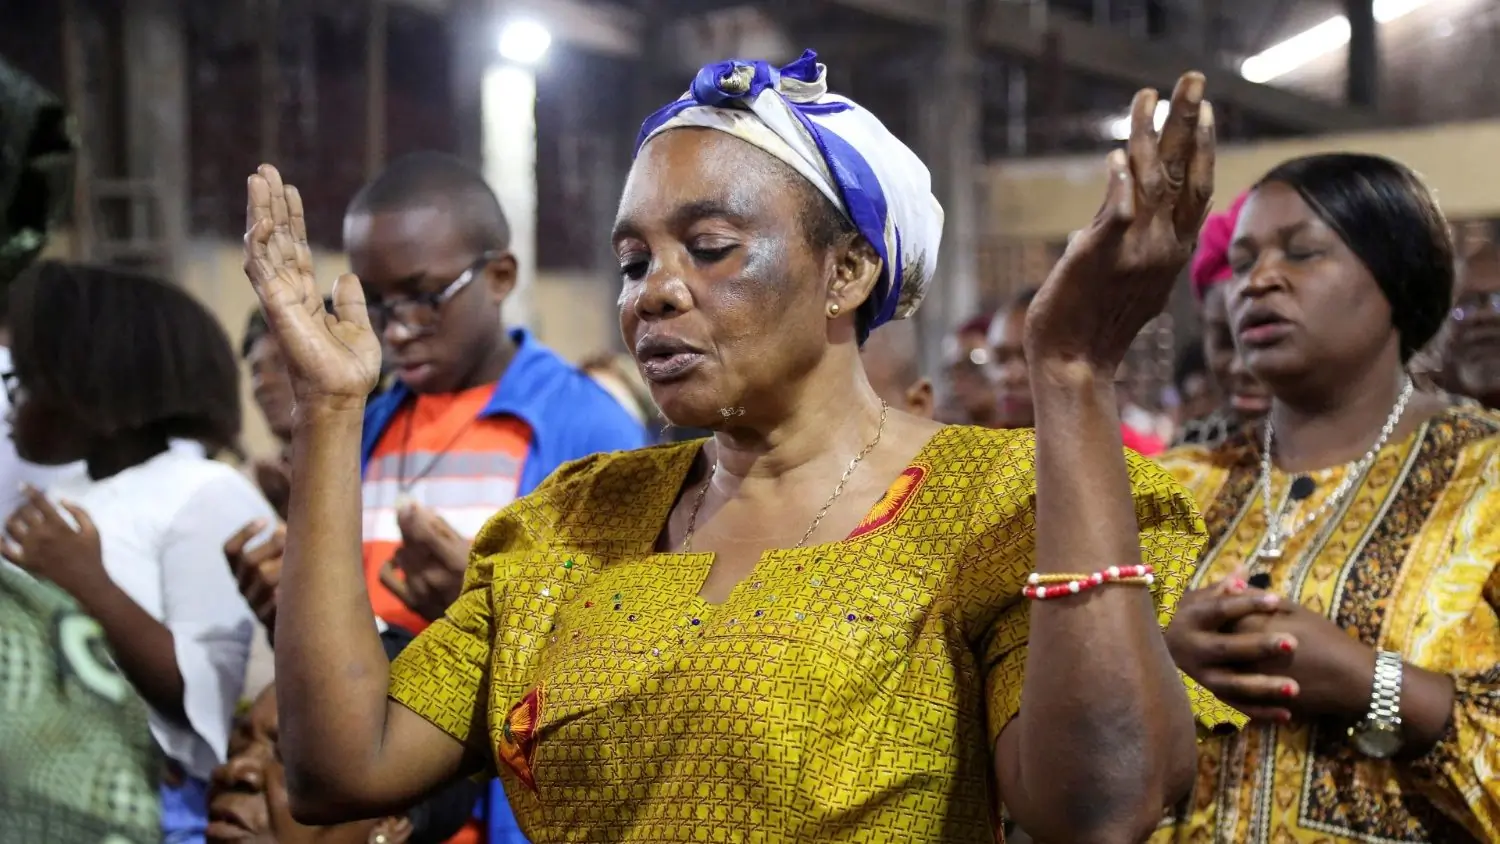 Catholics attend Mass in St. Charles parish in Kinshasa ahead of the Pope's visit to the Democratic Republic of the Congo